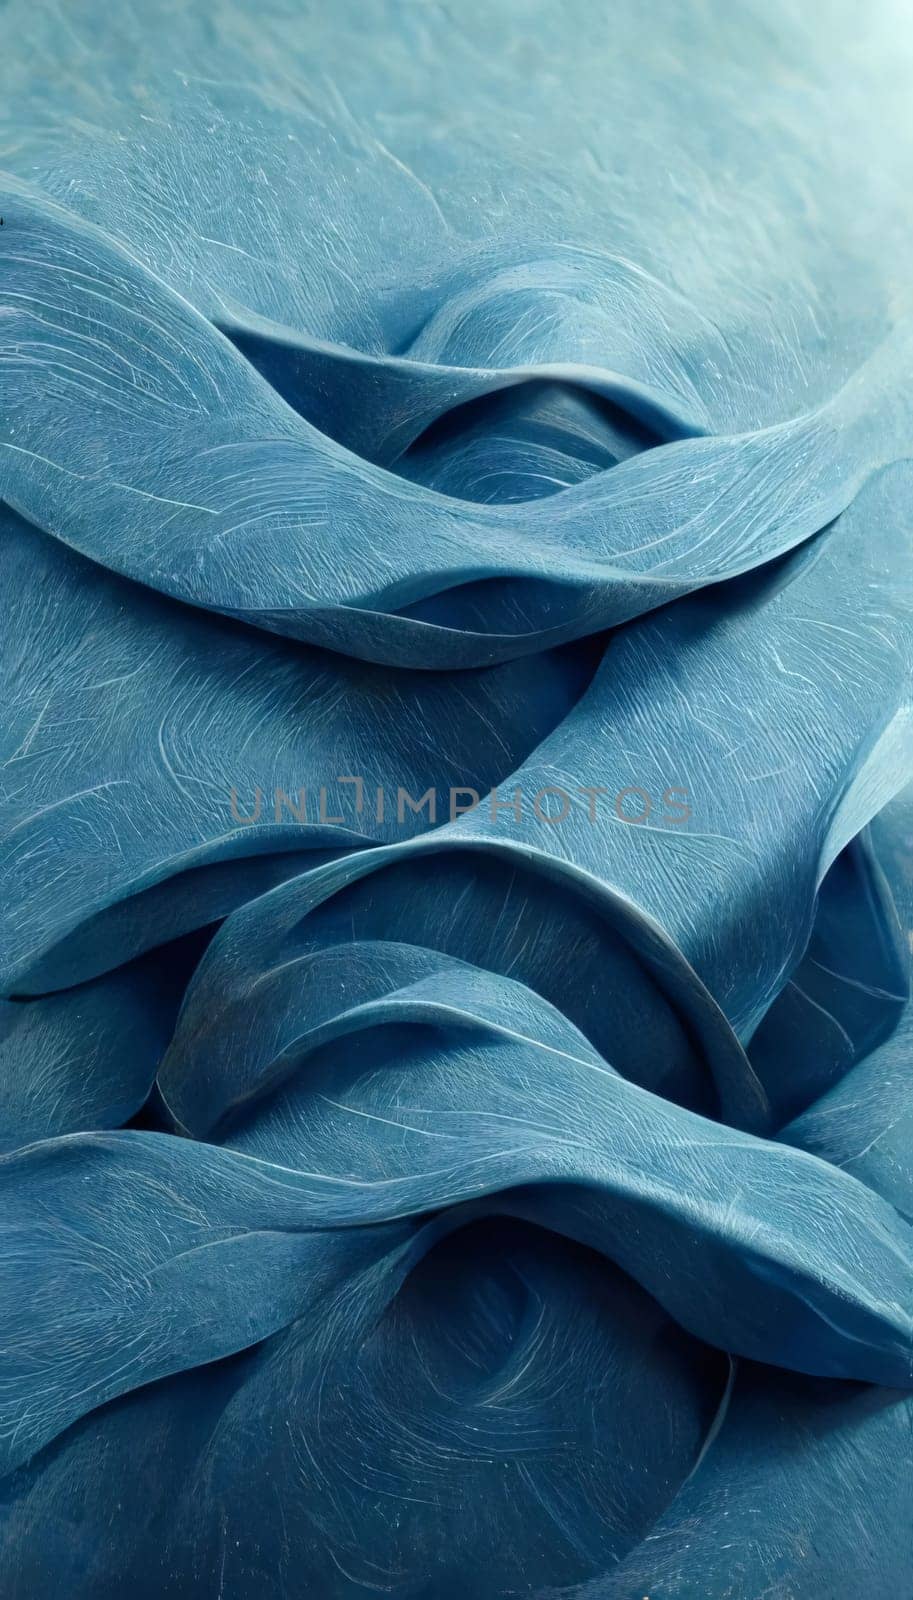 abstract background of blue silk fabric with folds close-up. by ThemesS